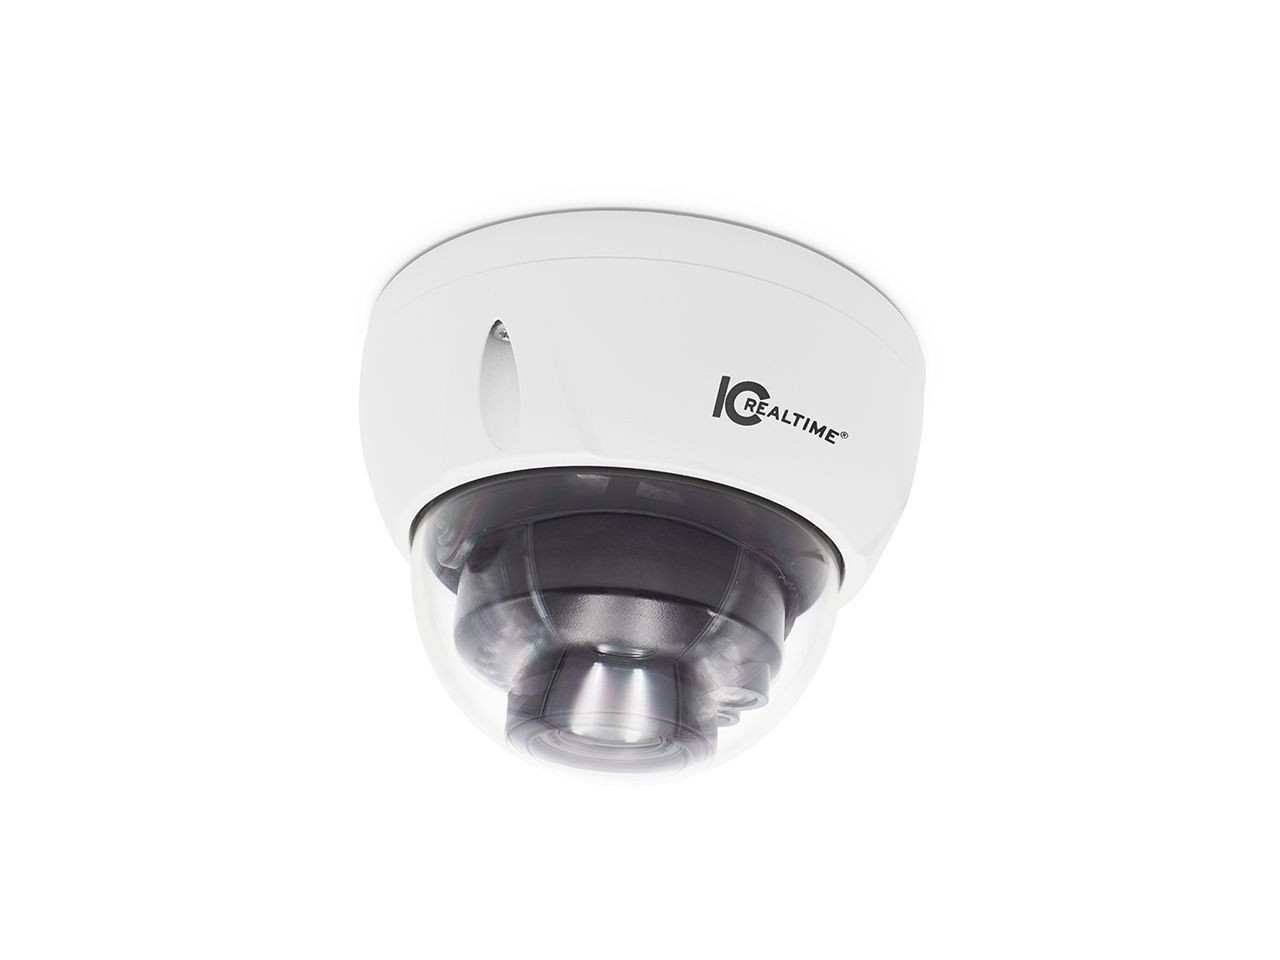 IPFX-D40V-IRW2 4MP IP Indoor/Outdoor Mid Size Vandal Dome Camera/131ft Smart IR/PoE Capable by ICRealtime